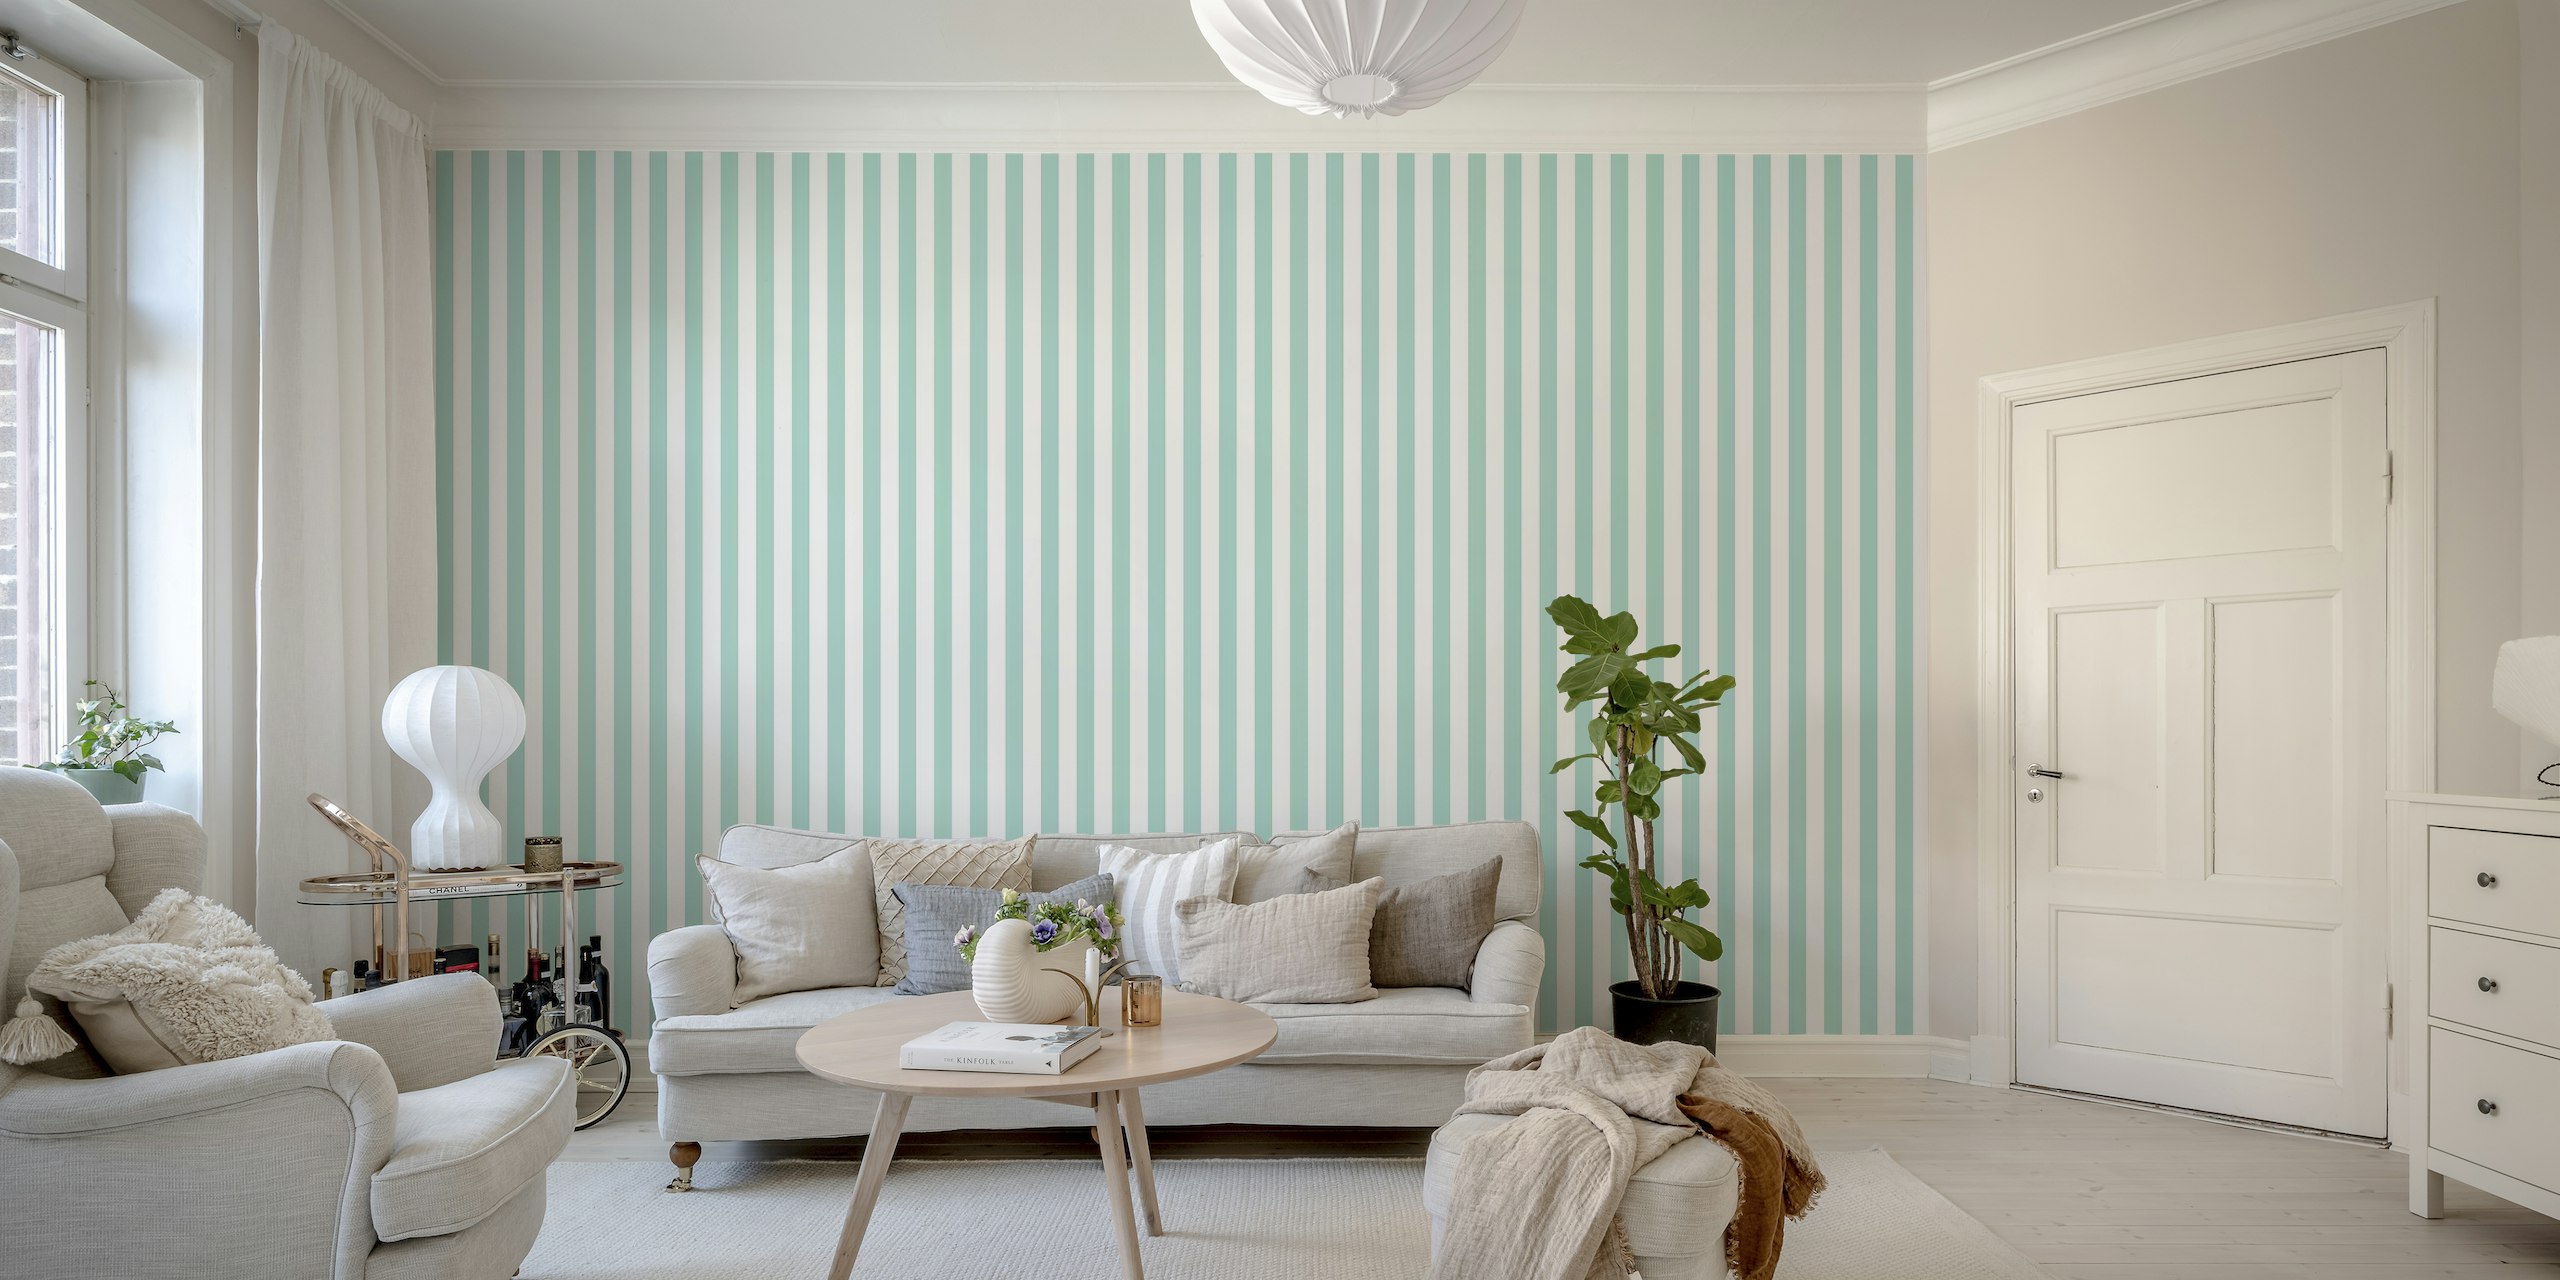 Mint and white stripes tapete